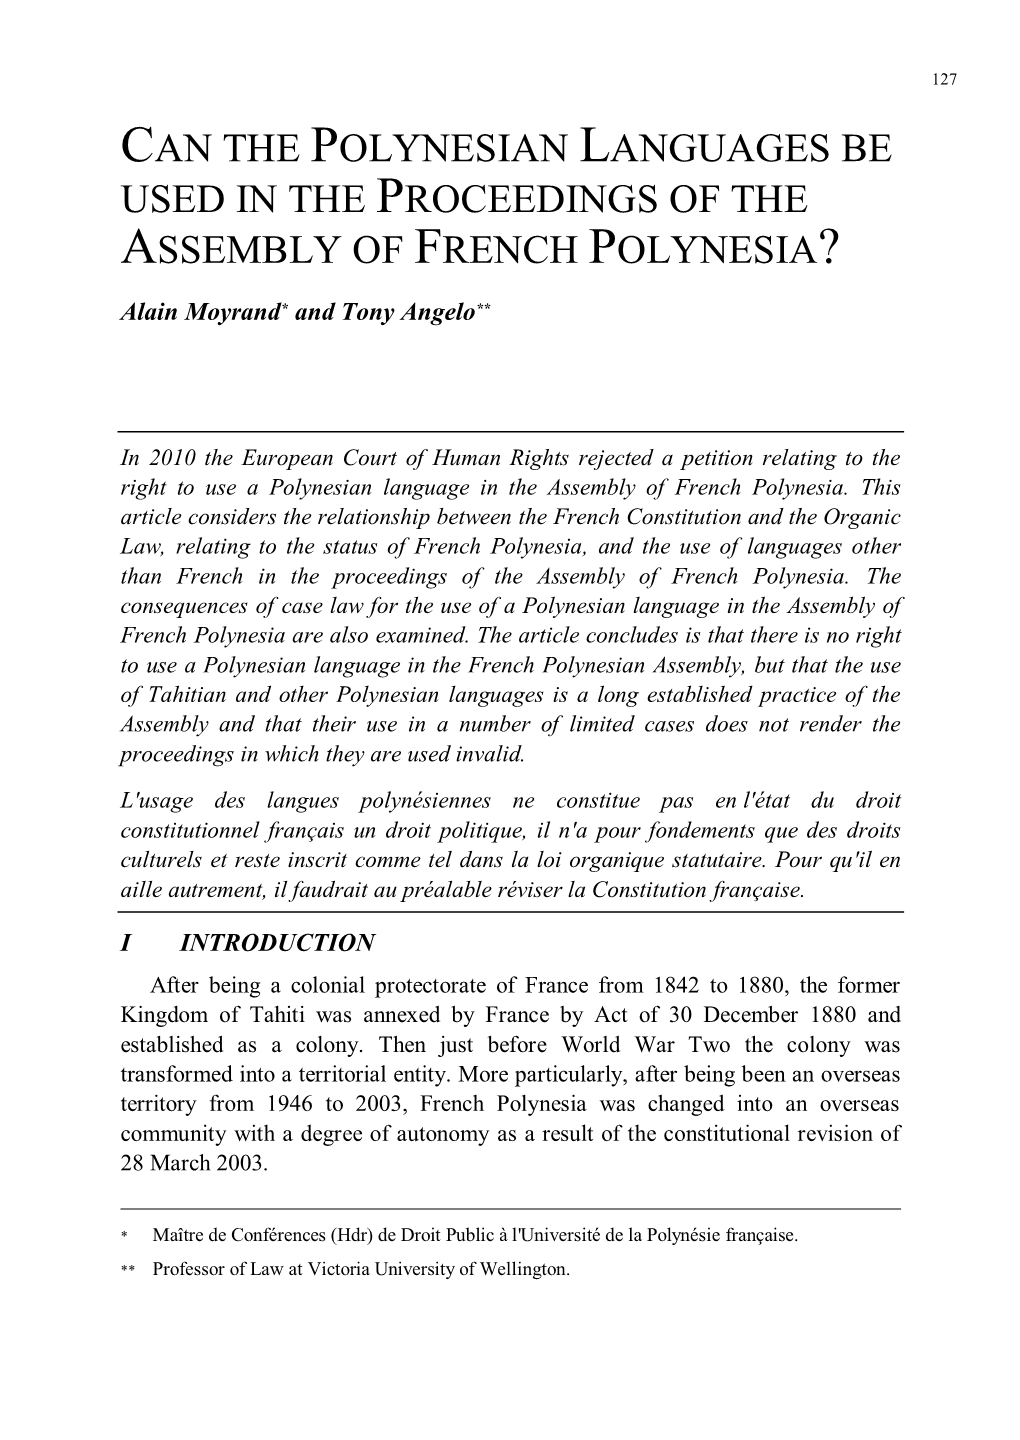 Can the Polynesian Languages Be Used in the Proceedings of the Assembly of French Polynesia?